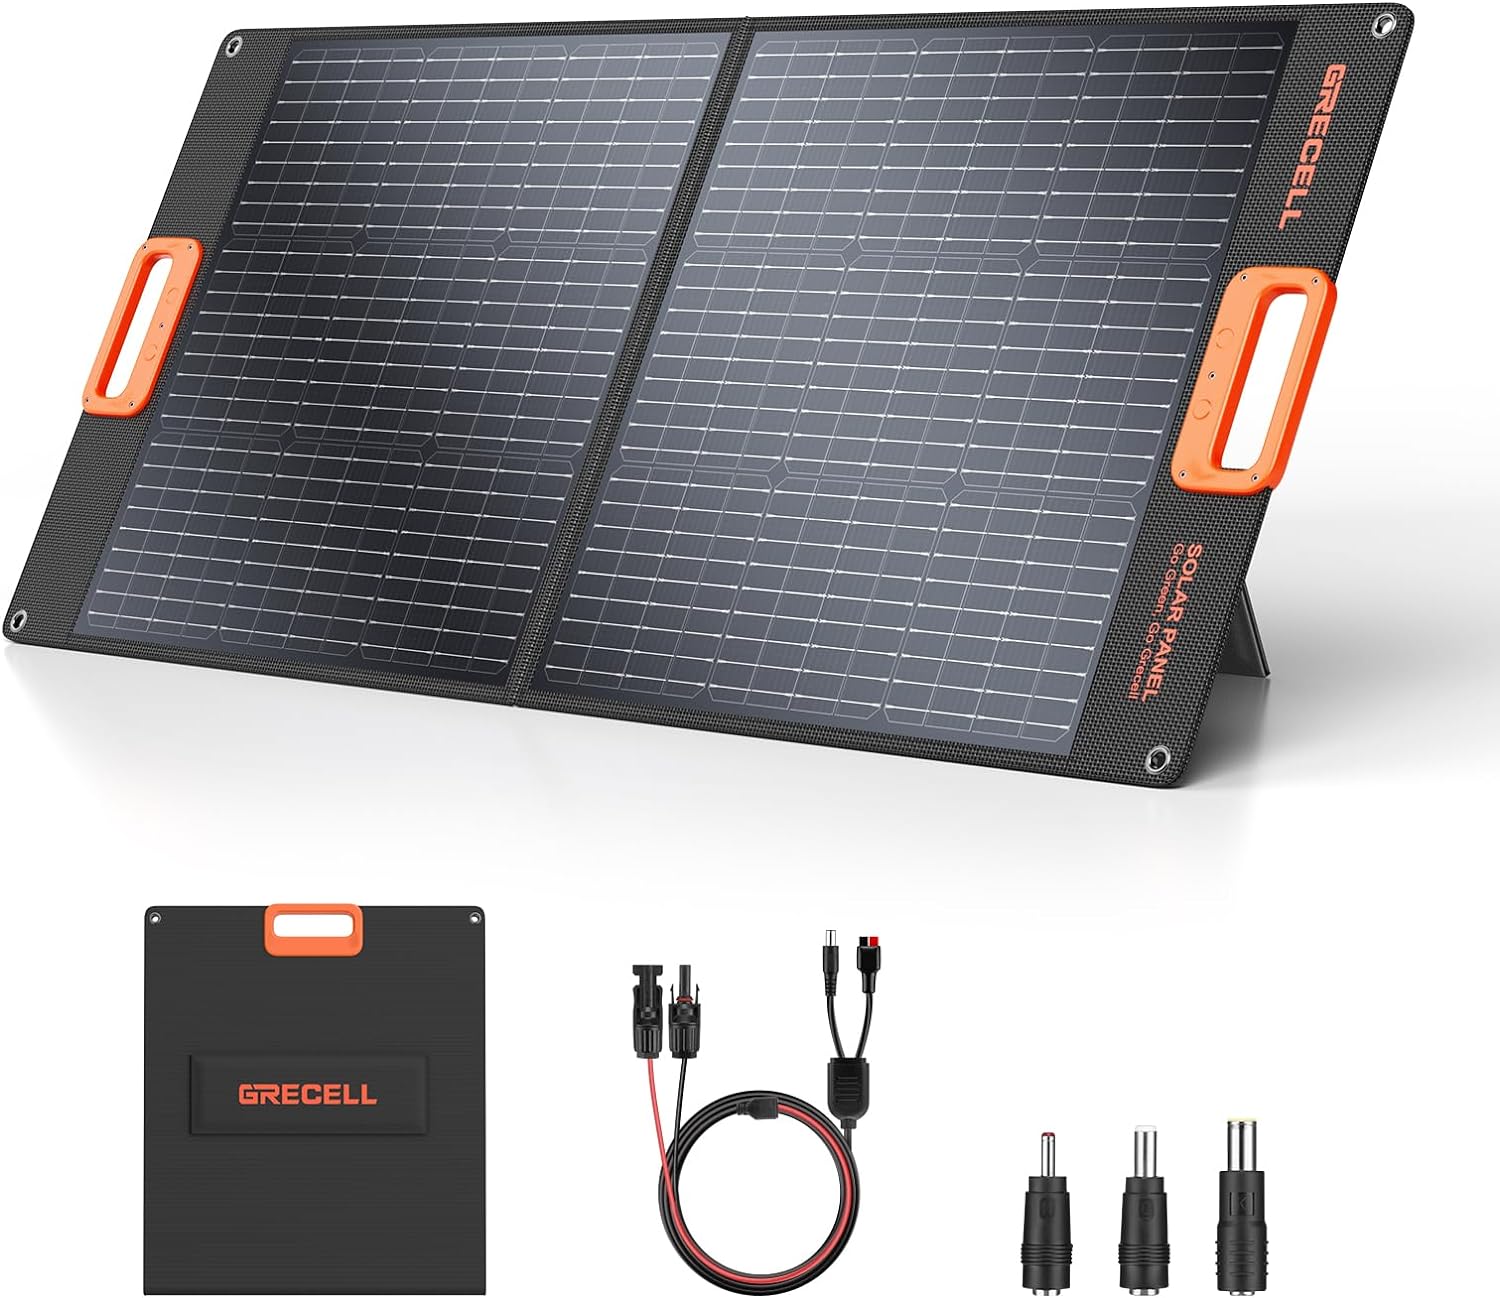 GRECELL 100W Portable Solar Panel for Power Station Generator, 20V Foldable Solar Cell Solar Charger with MC-4 High-Efficiency Battery Charger for Outdoor Camping Van RV Trip